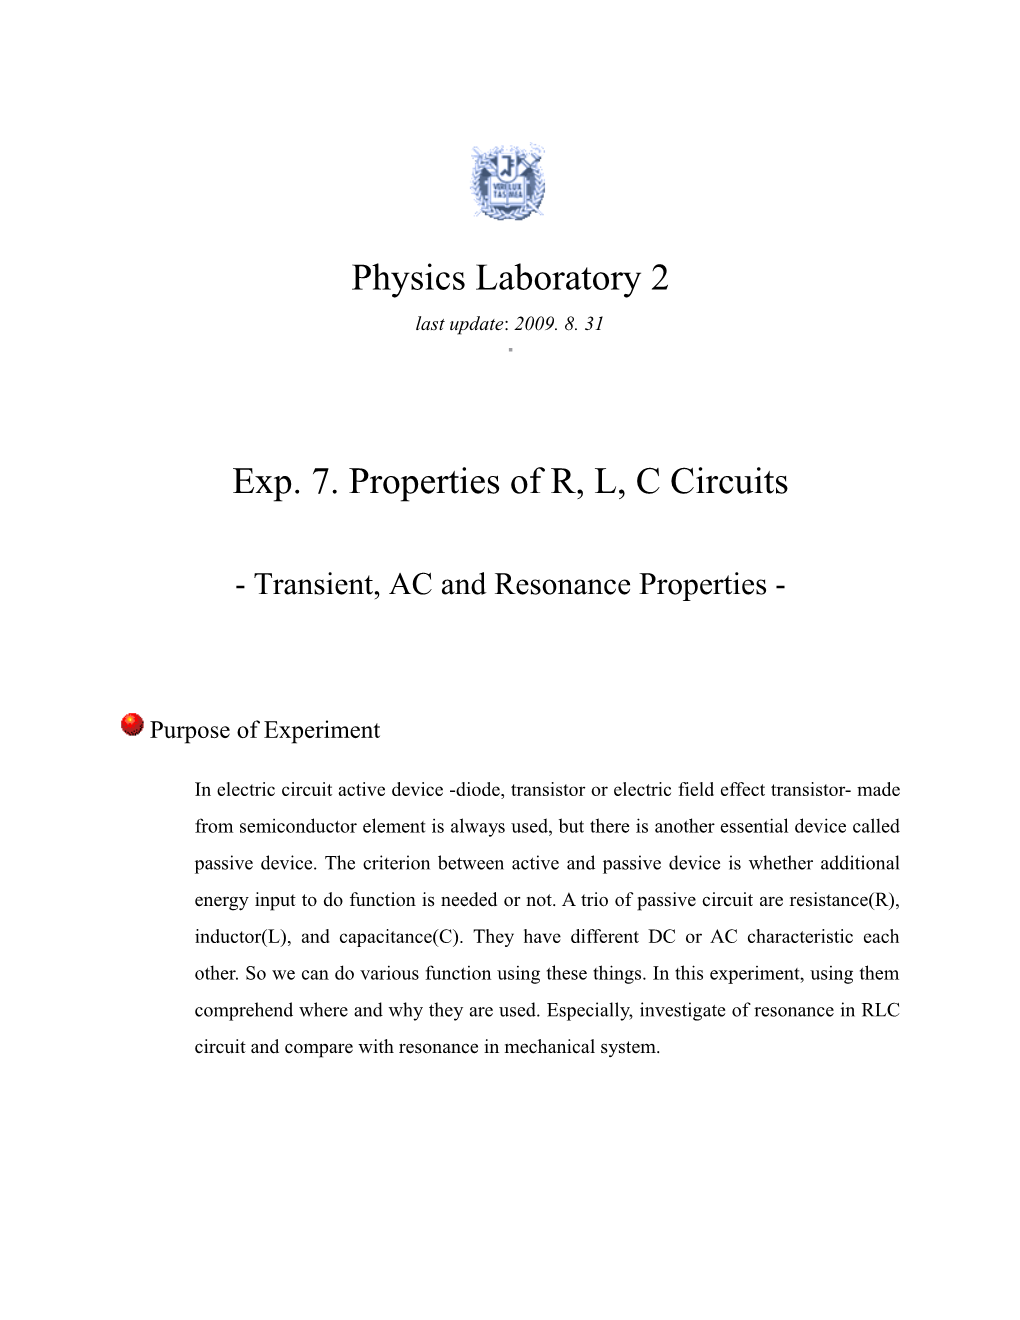 Exp. 7. Properties of R, L, C Circuits - Transient, AC and Resonance Properties